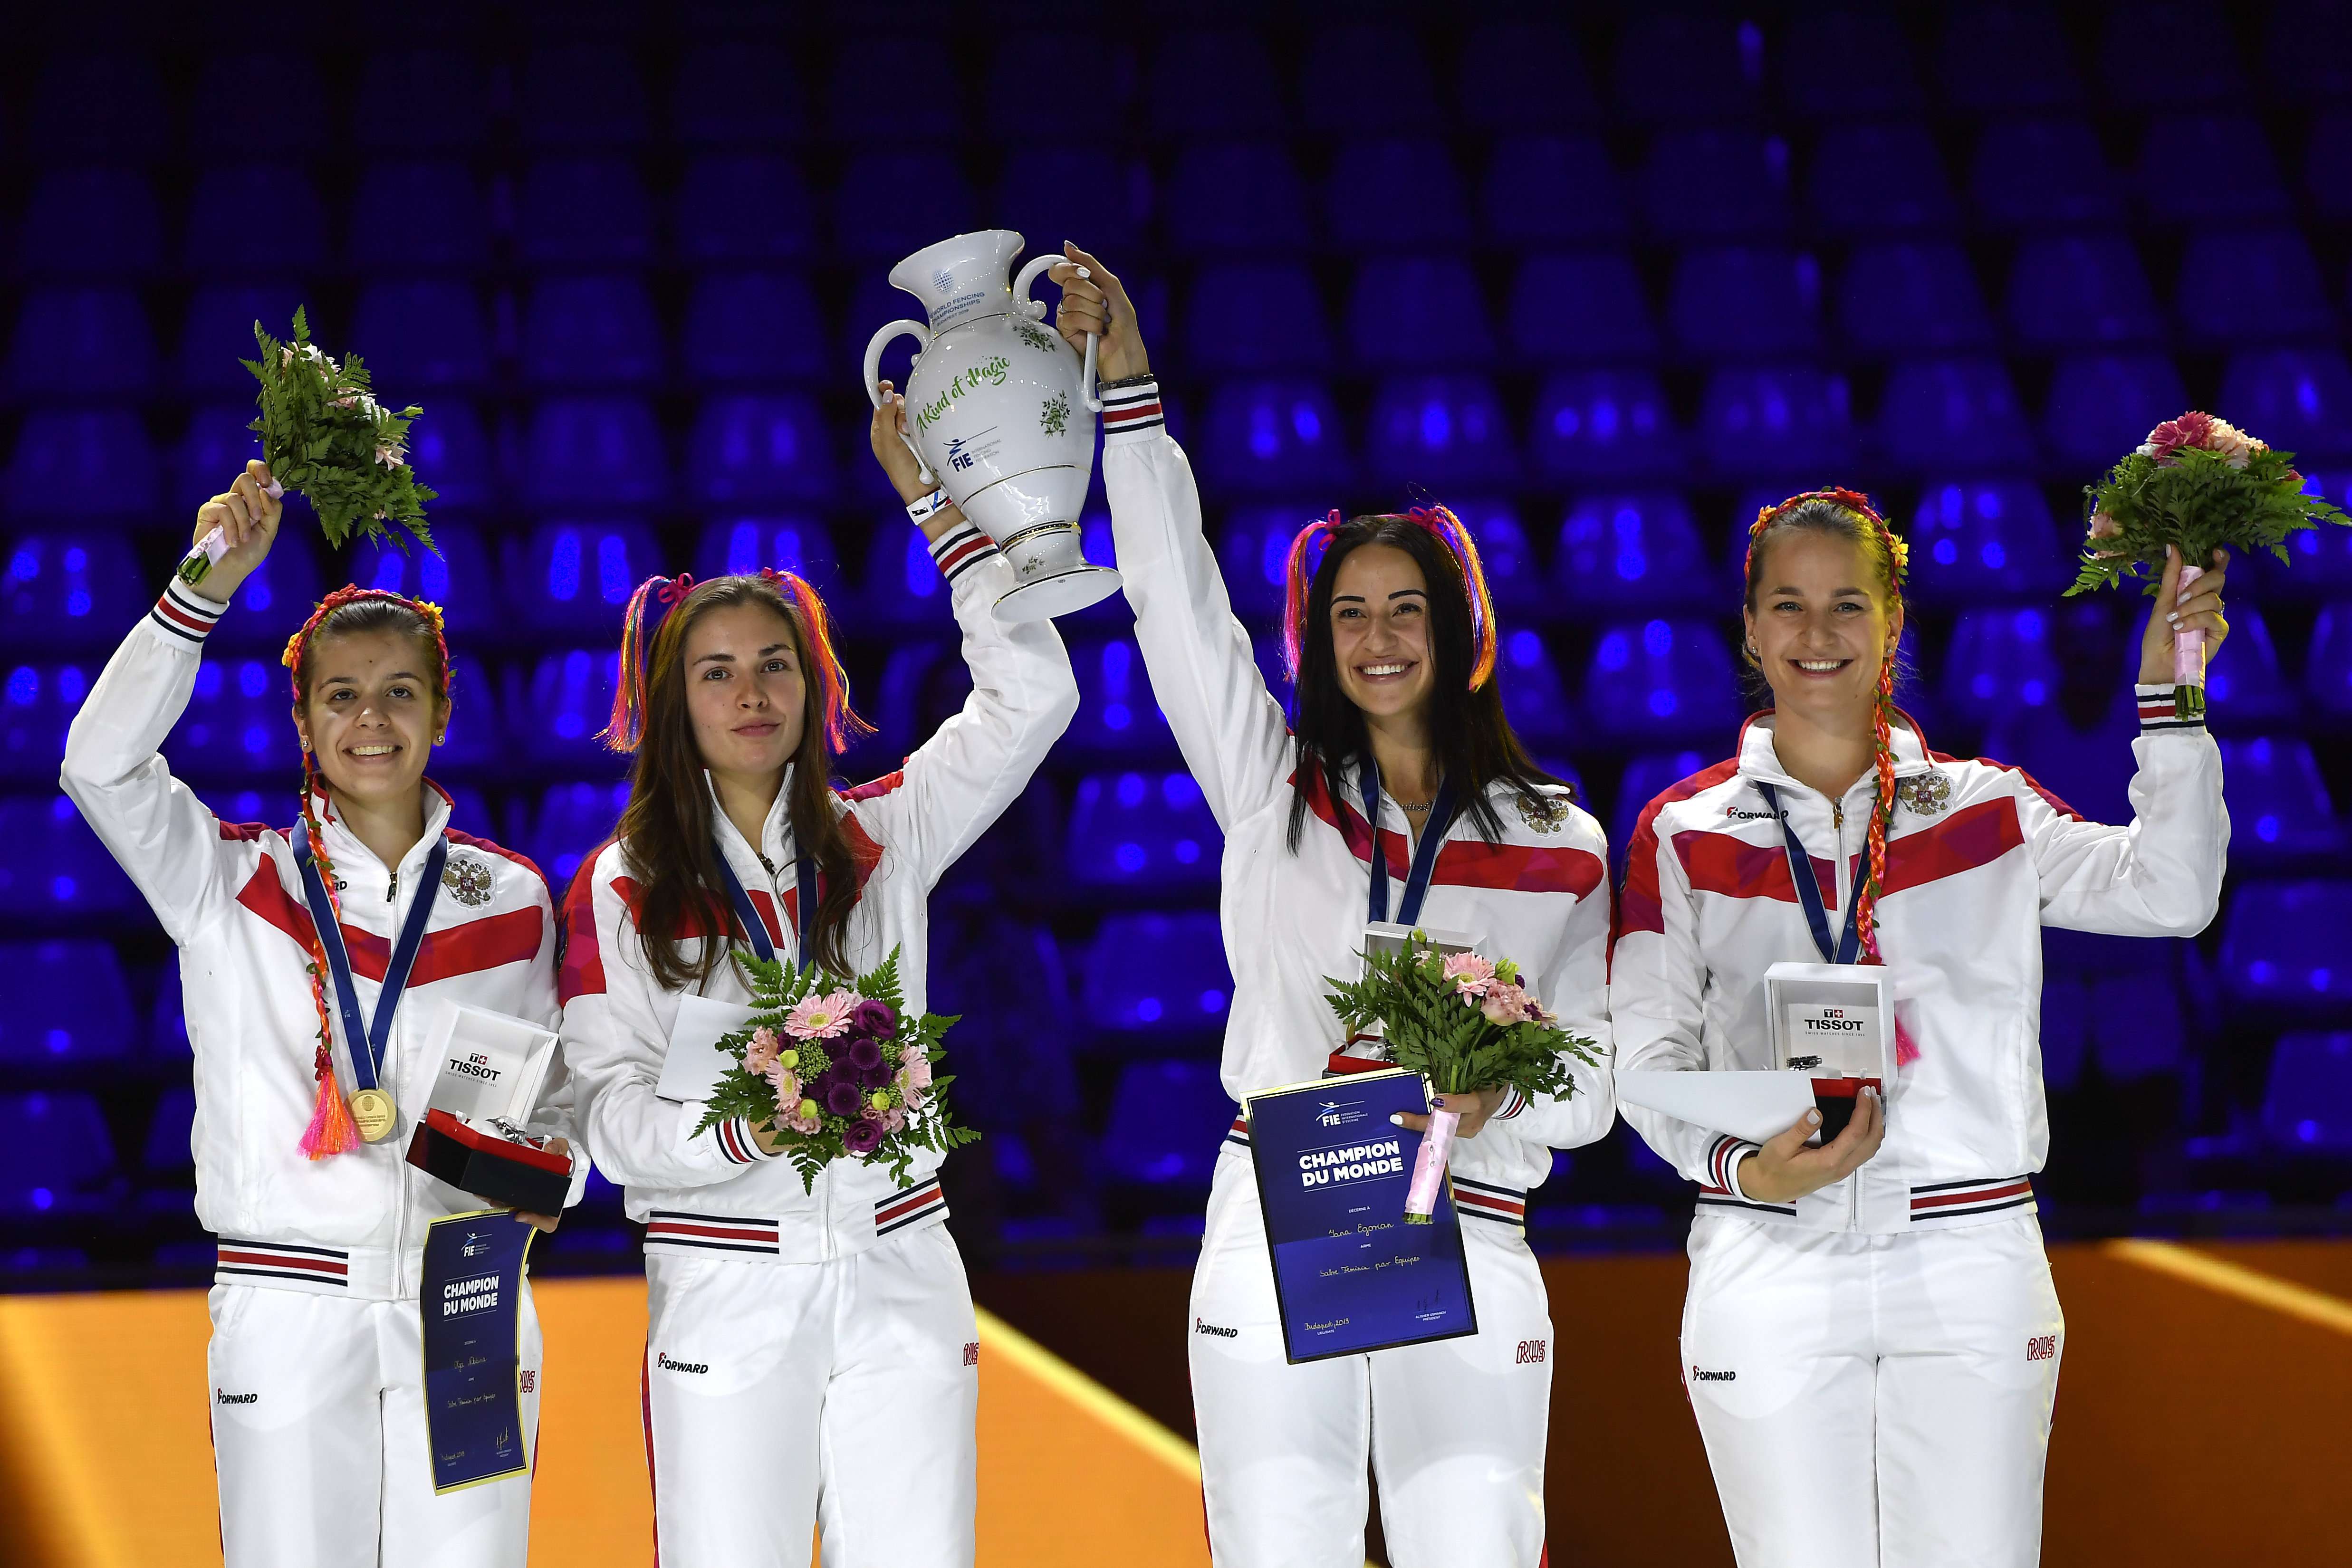 Fencing - Women's sabre team - Russia wins gold - Photos